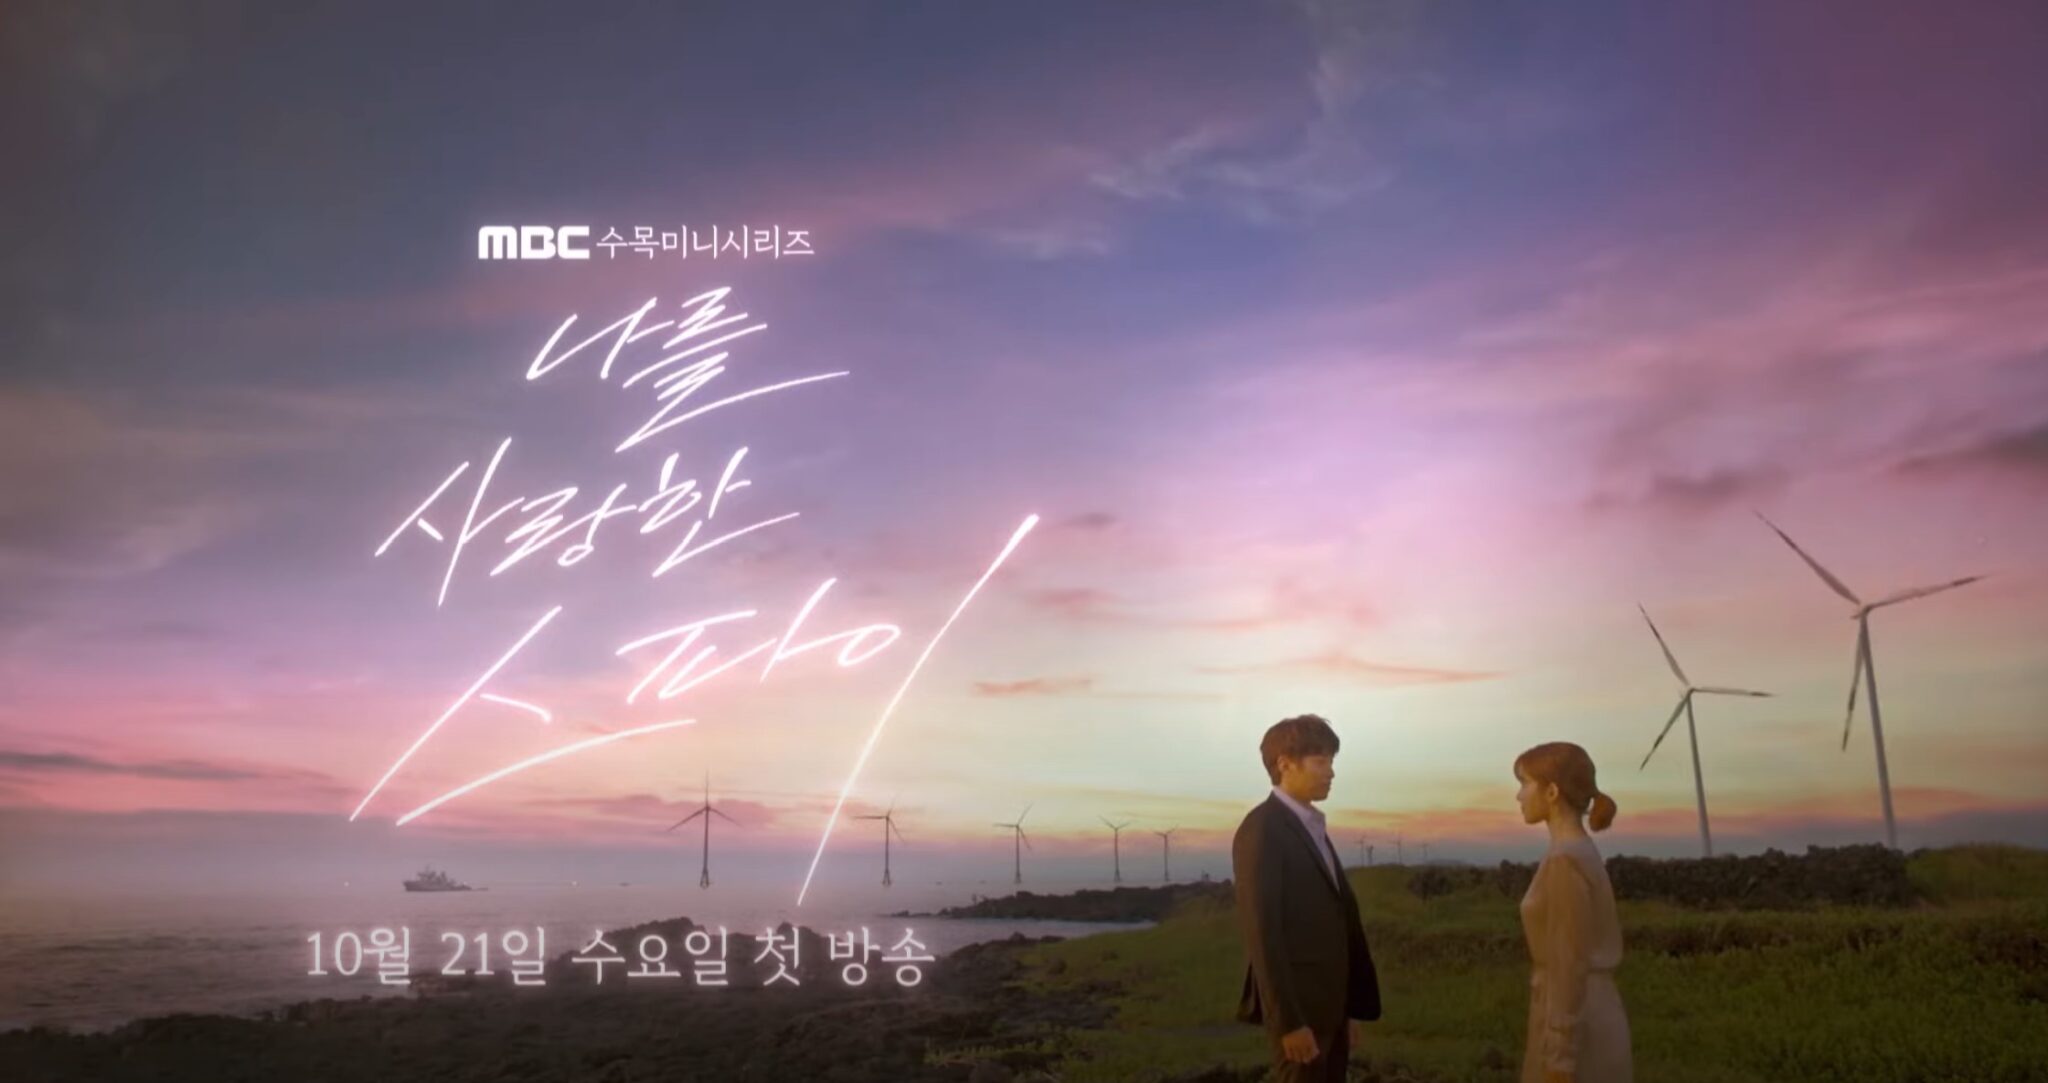 Eric and Yoo Inna reminisce about past love in new teaser for The Spy Who Loved Me